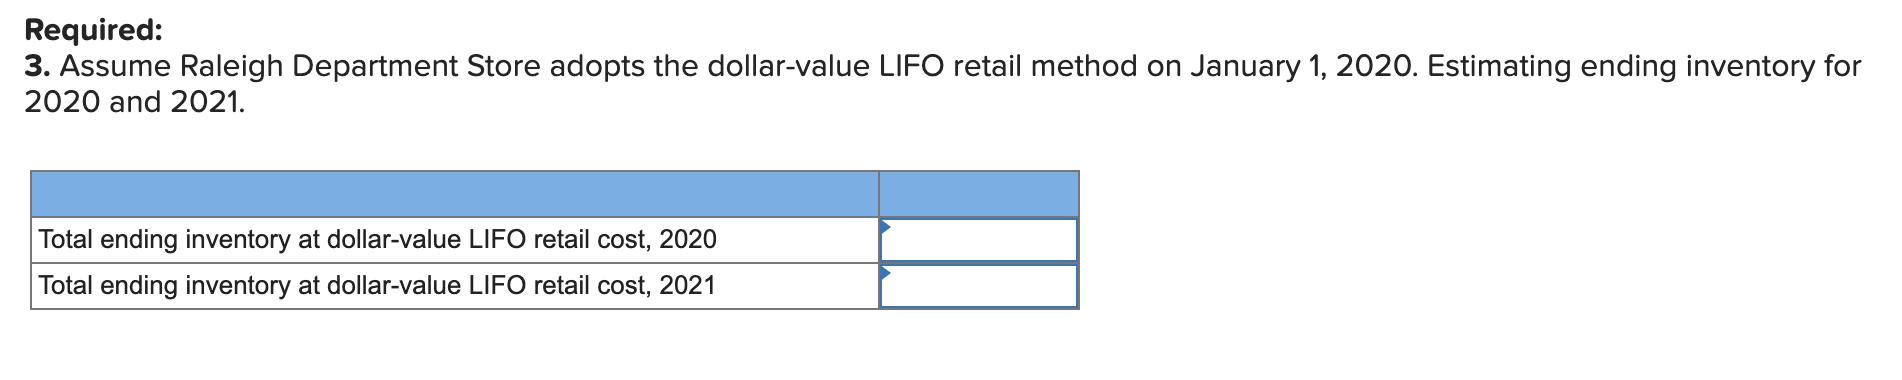 Required: 3. Assume Raleigh Department Store adopts the dollar-value LIFO retail method on January 1, 2020. Estimating ending